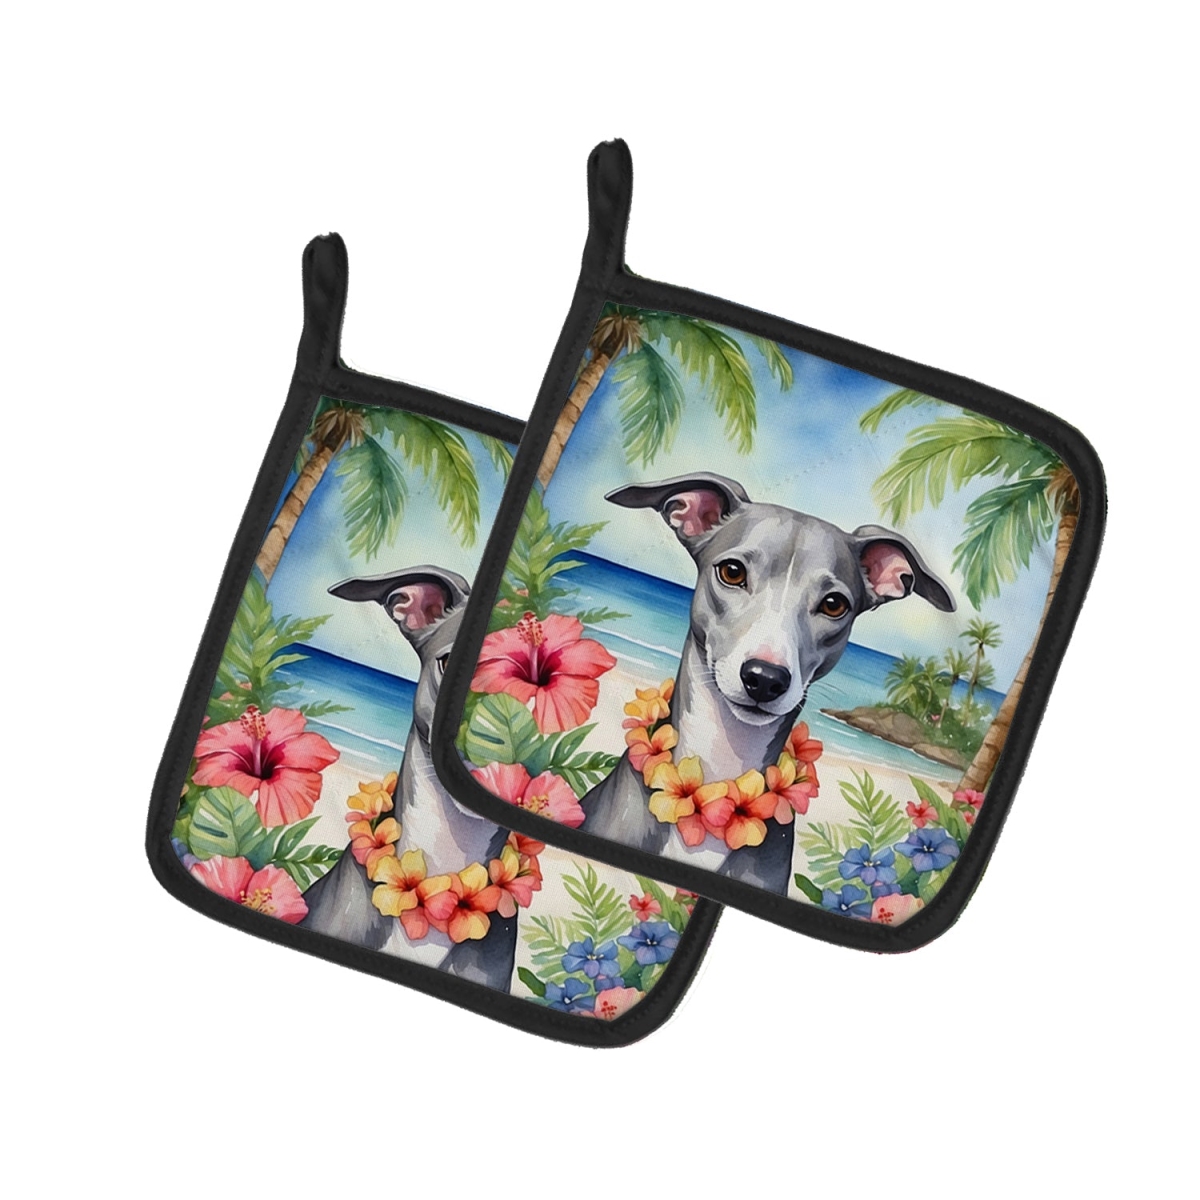 Picture of Carolines Treasures DAC6537PTHD 7.5 x 7.5 in. Whippet Luau Pair of Pot Holder